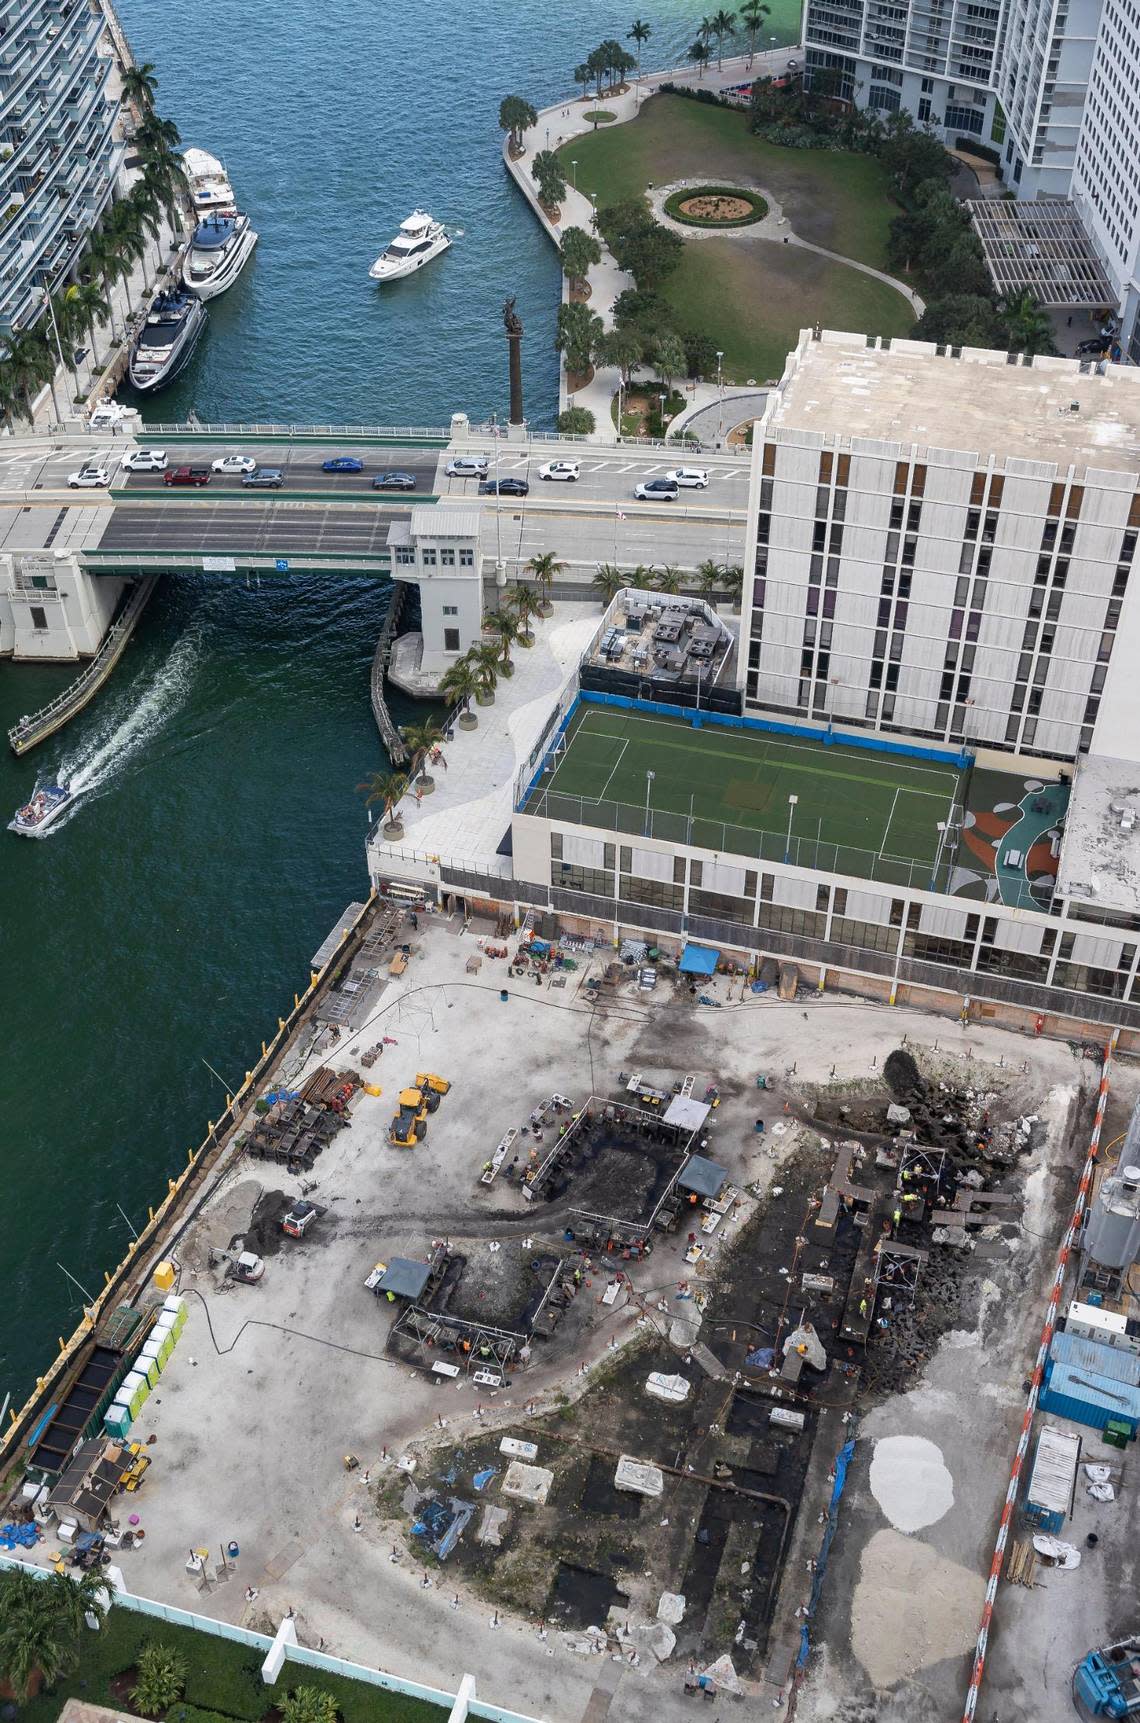 Archaeologists excavating the site of a planned Related Group residential tower complex on the Miami River in Brickell have uncovered extensive evidence of prehistoric indigenous settlements dating back to the dawn of human civilization 7,000 years ago. The discoveries indicate that the capital of the Tequesta tribe, believed responsible for the 2,000-year-old Miami Circle, visible at top, was significantly more extensive than once believed.